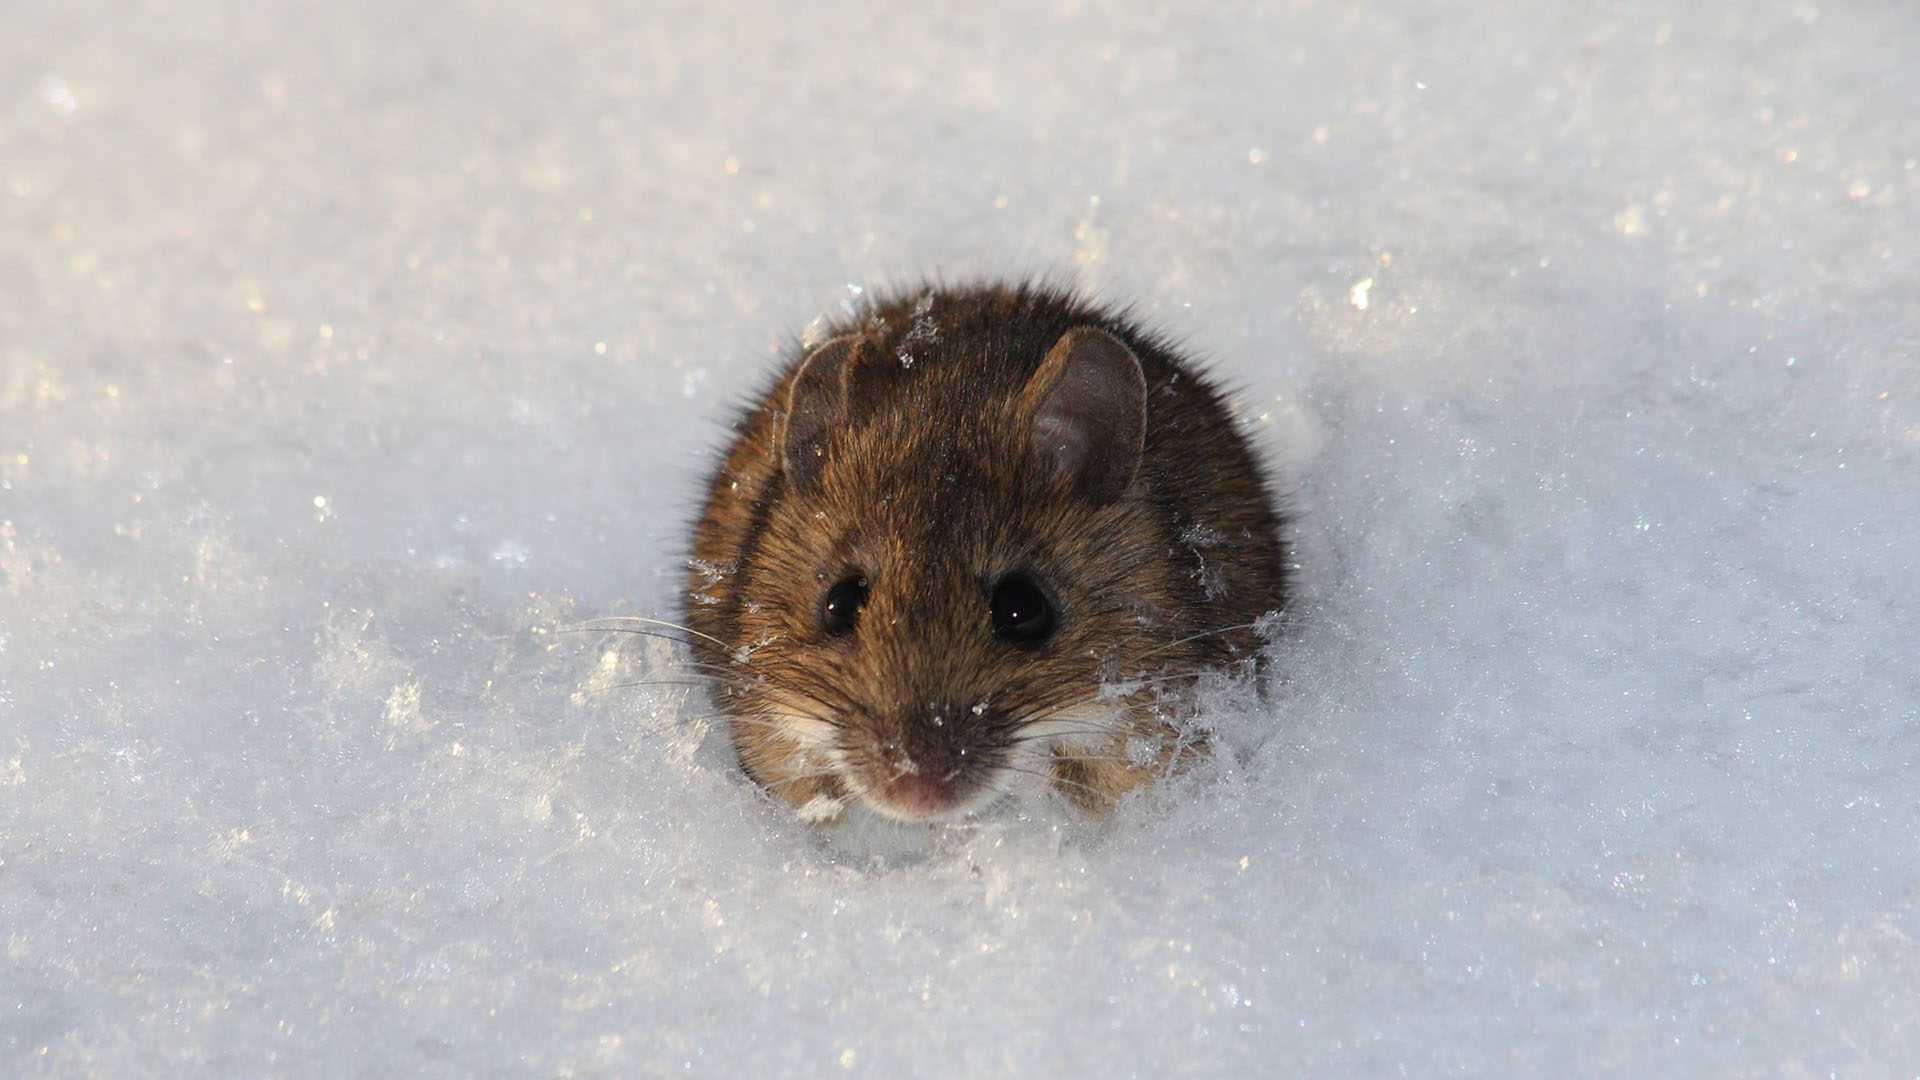 Mouse in snow